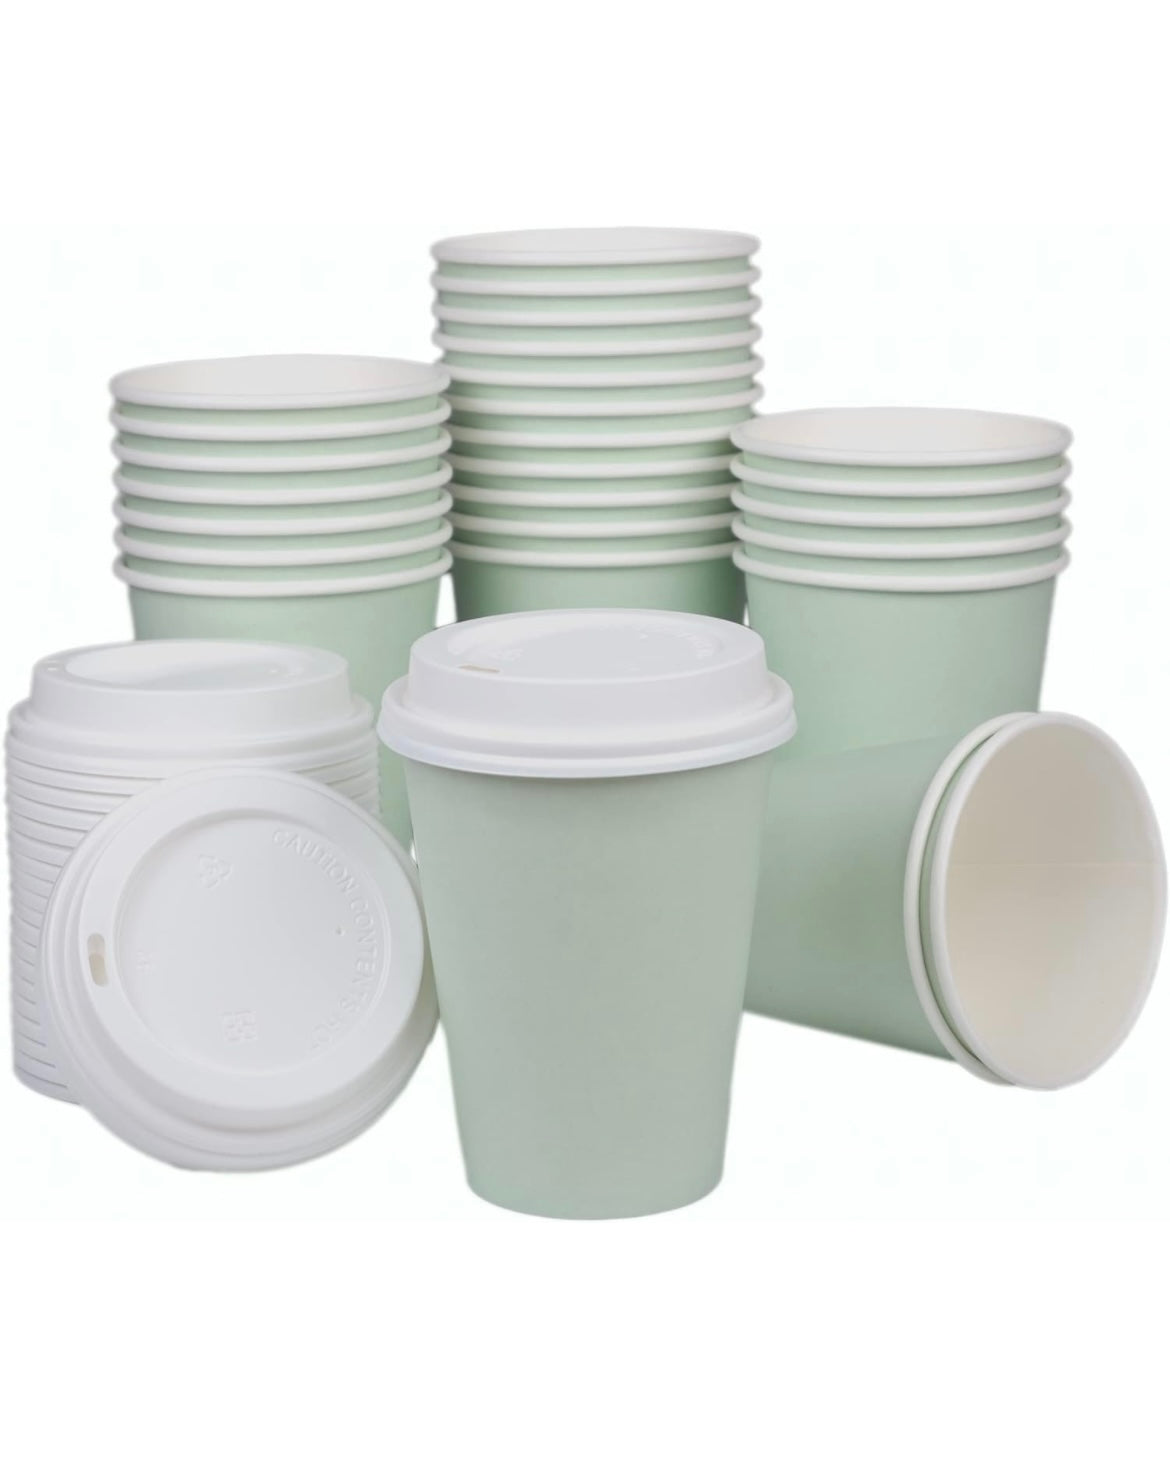 BrewHouse Disposable Coffee Cups with Lids | Luxury Paper Cups | Disposable Cups with Lids | Travel Coffee Cups | To Go Cups | Hot Cups | Paper Coffee Cups with Lids | (12oz - 25 Pack)